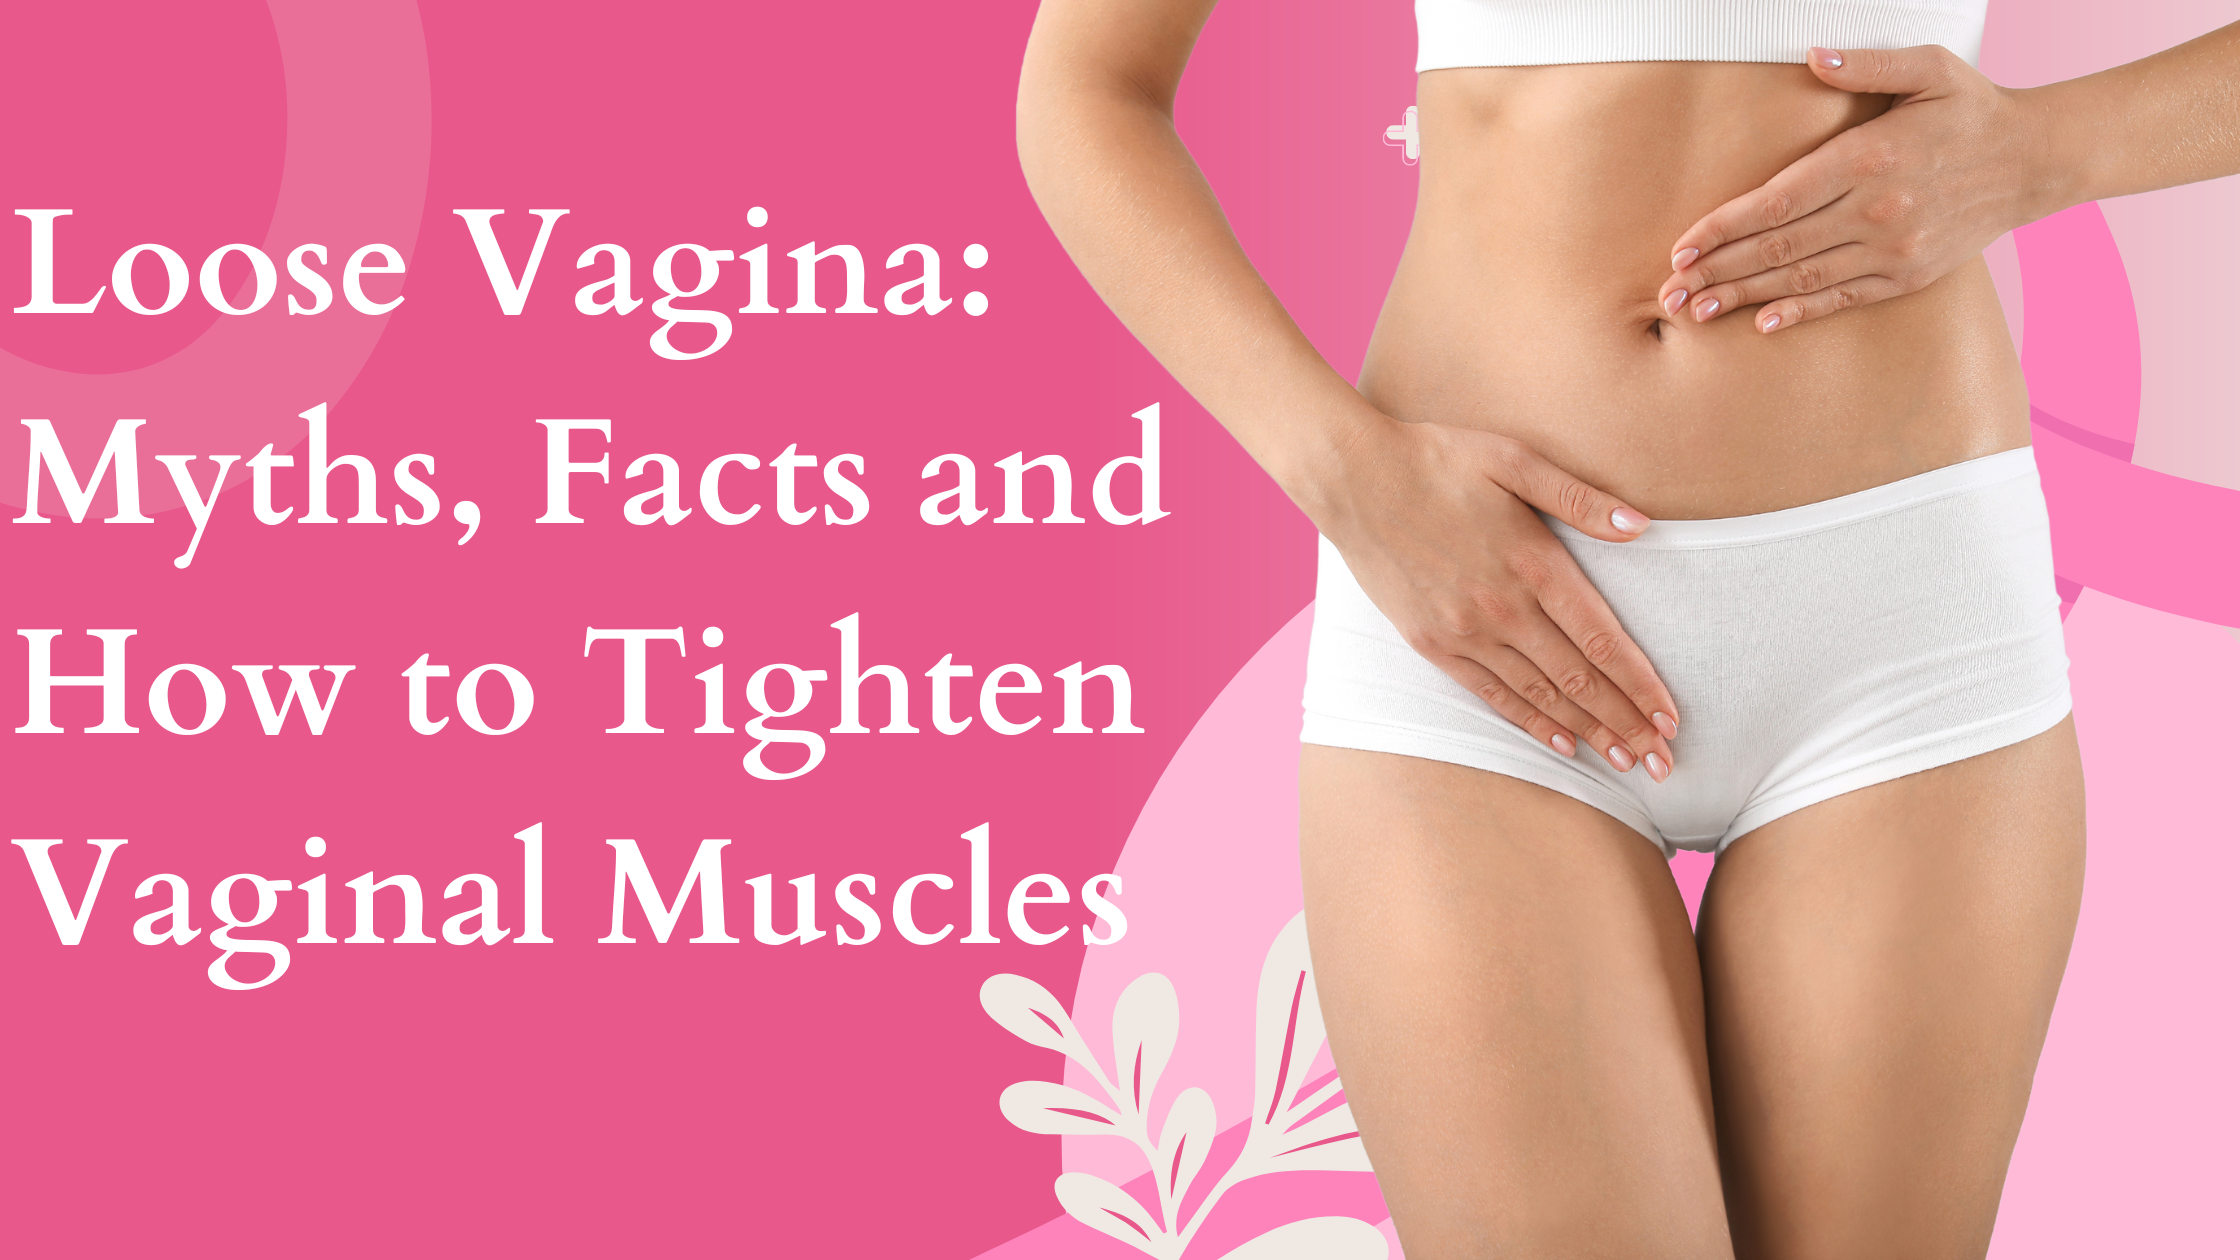 Loose Vagina: Myths, Facts and How to Tighten Vaginal Muscles